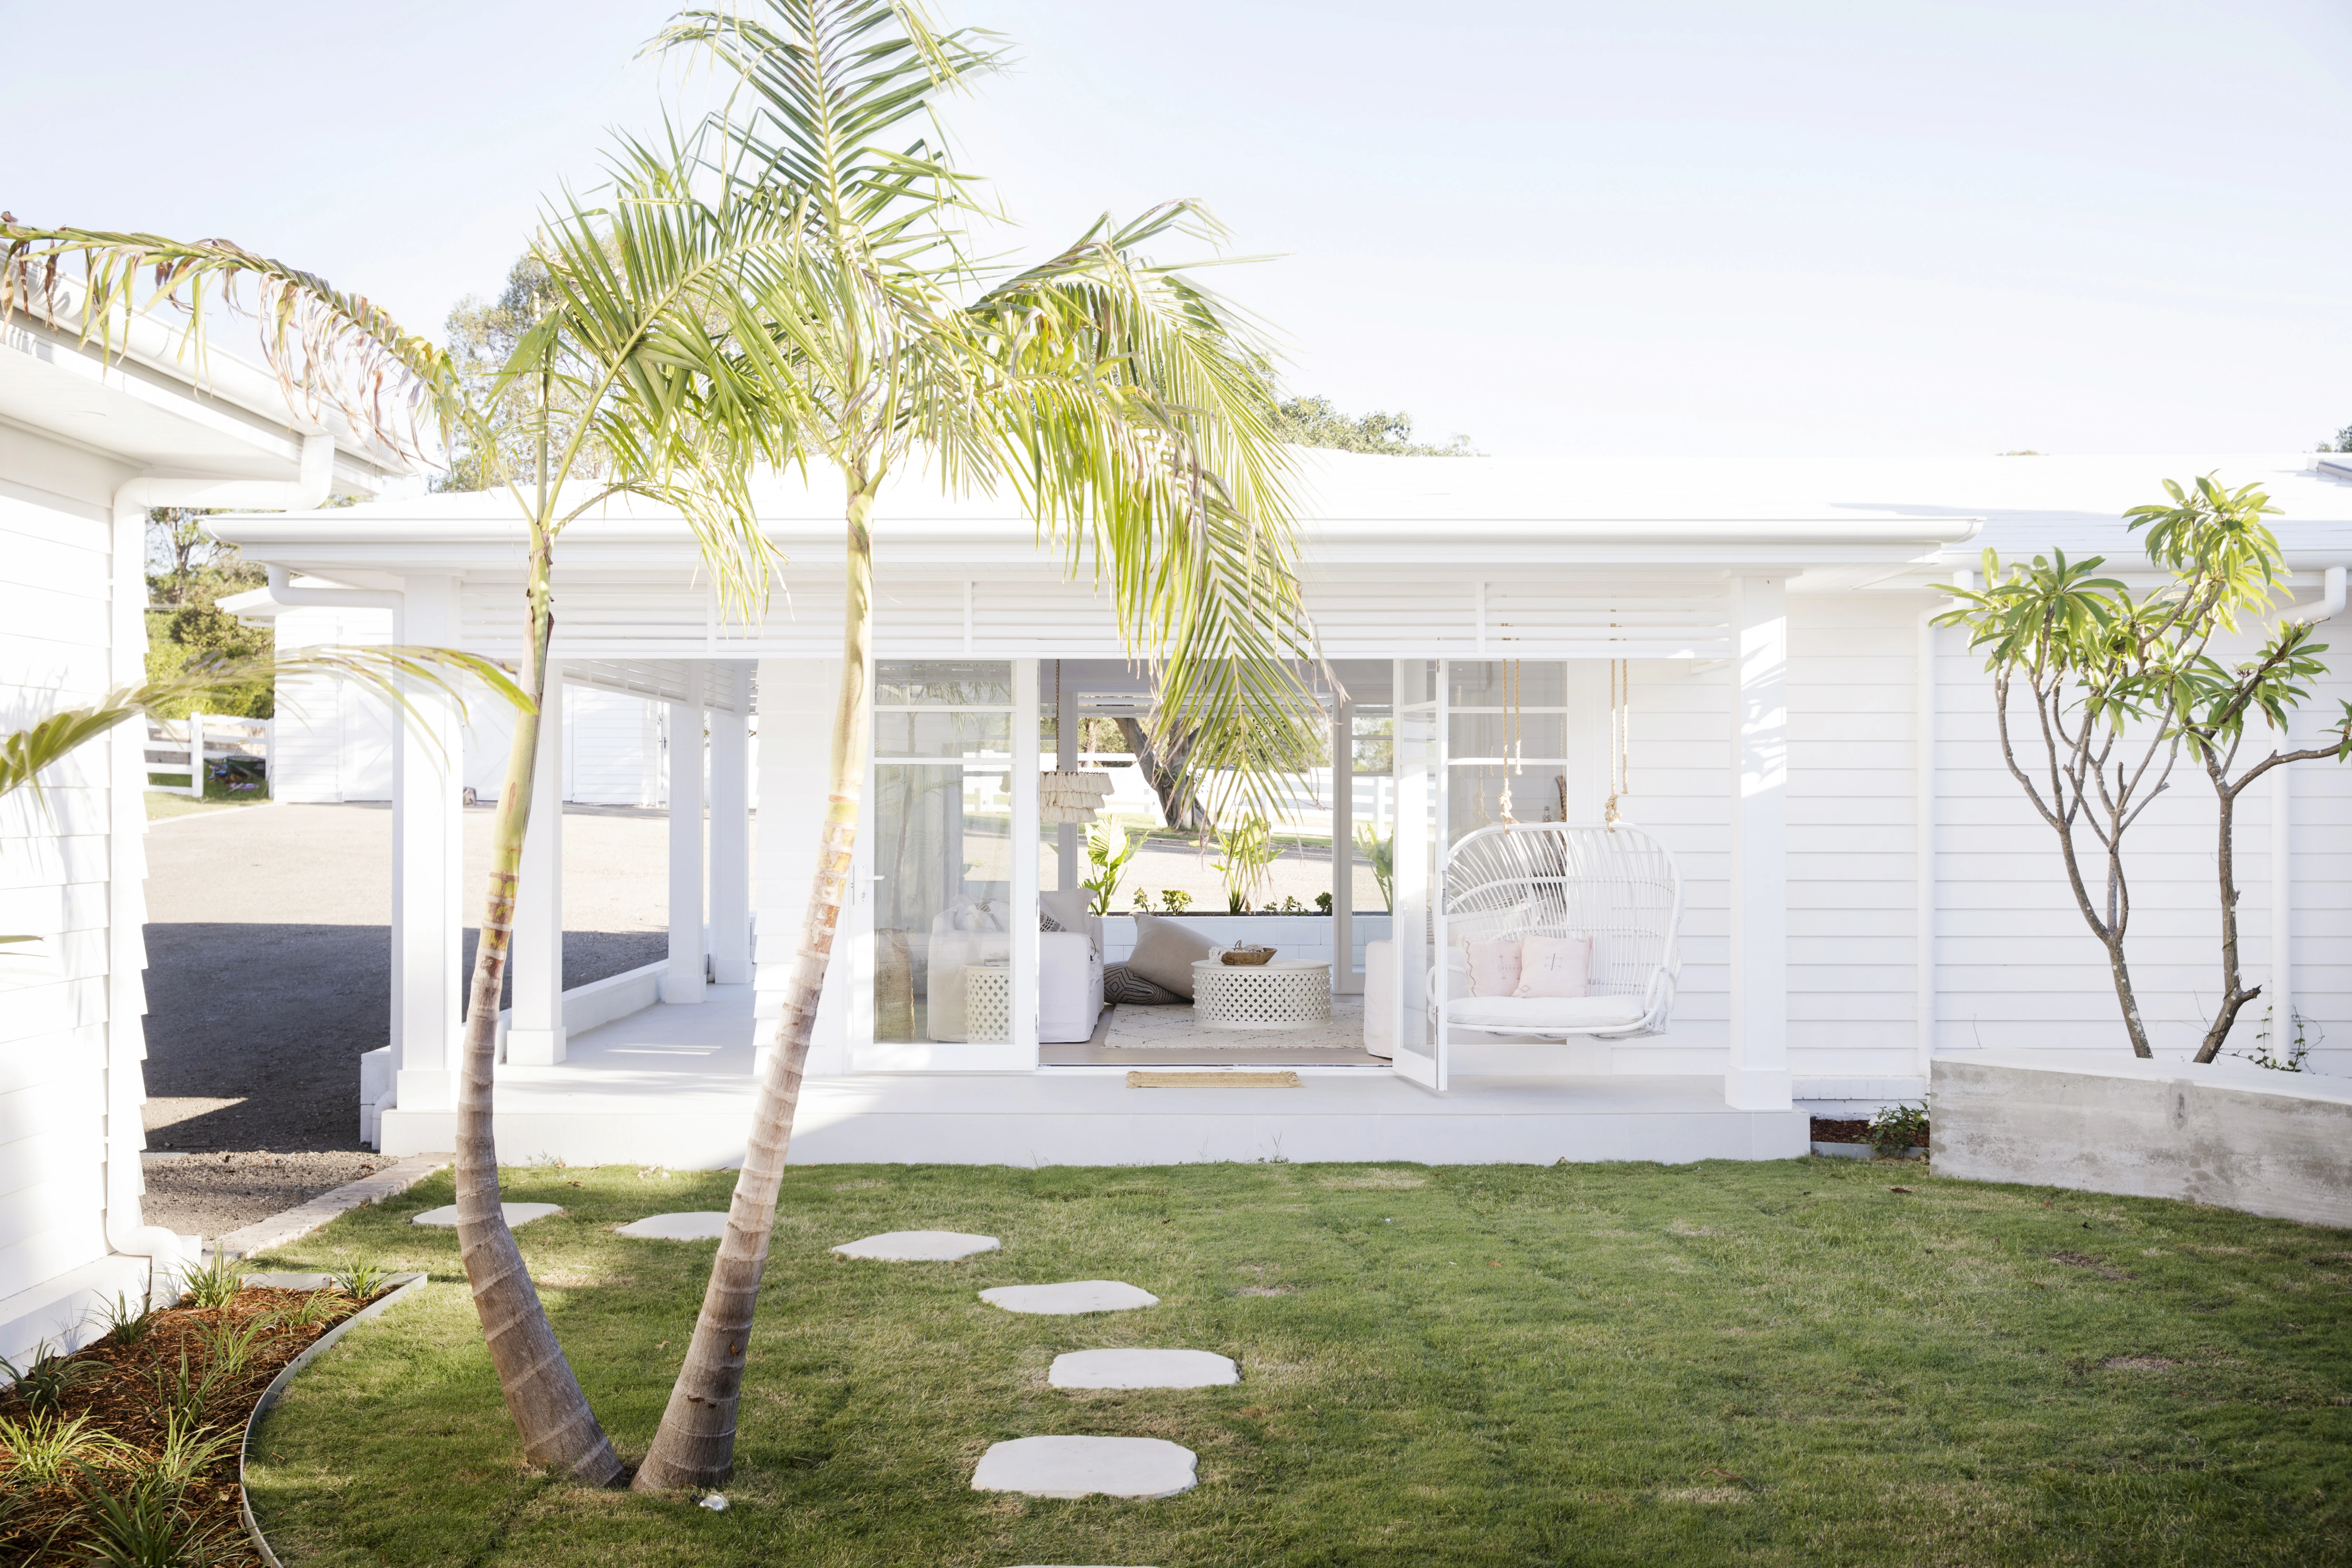 Low ceiling 70's style home with palm trees in front garden painted in white. 